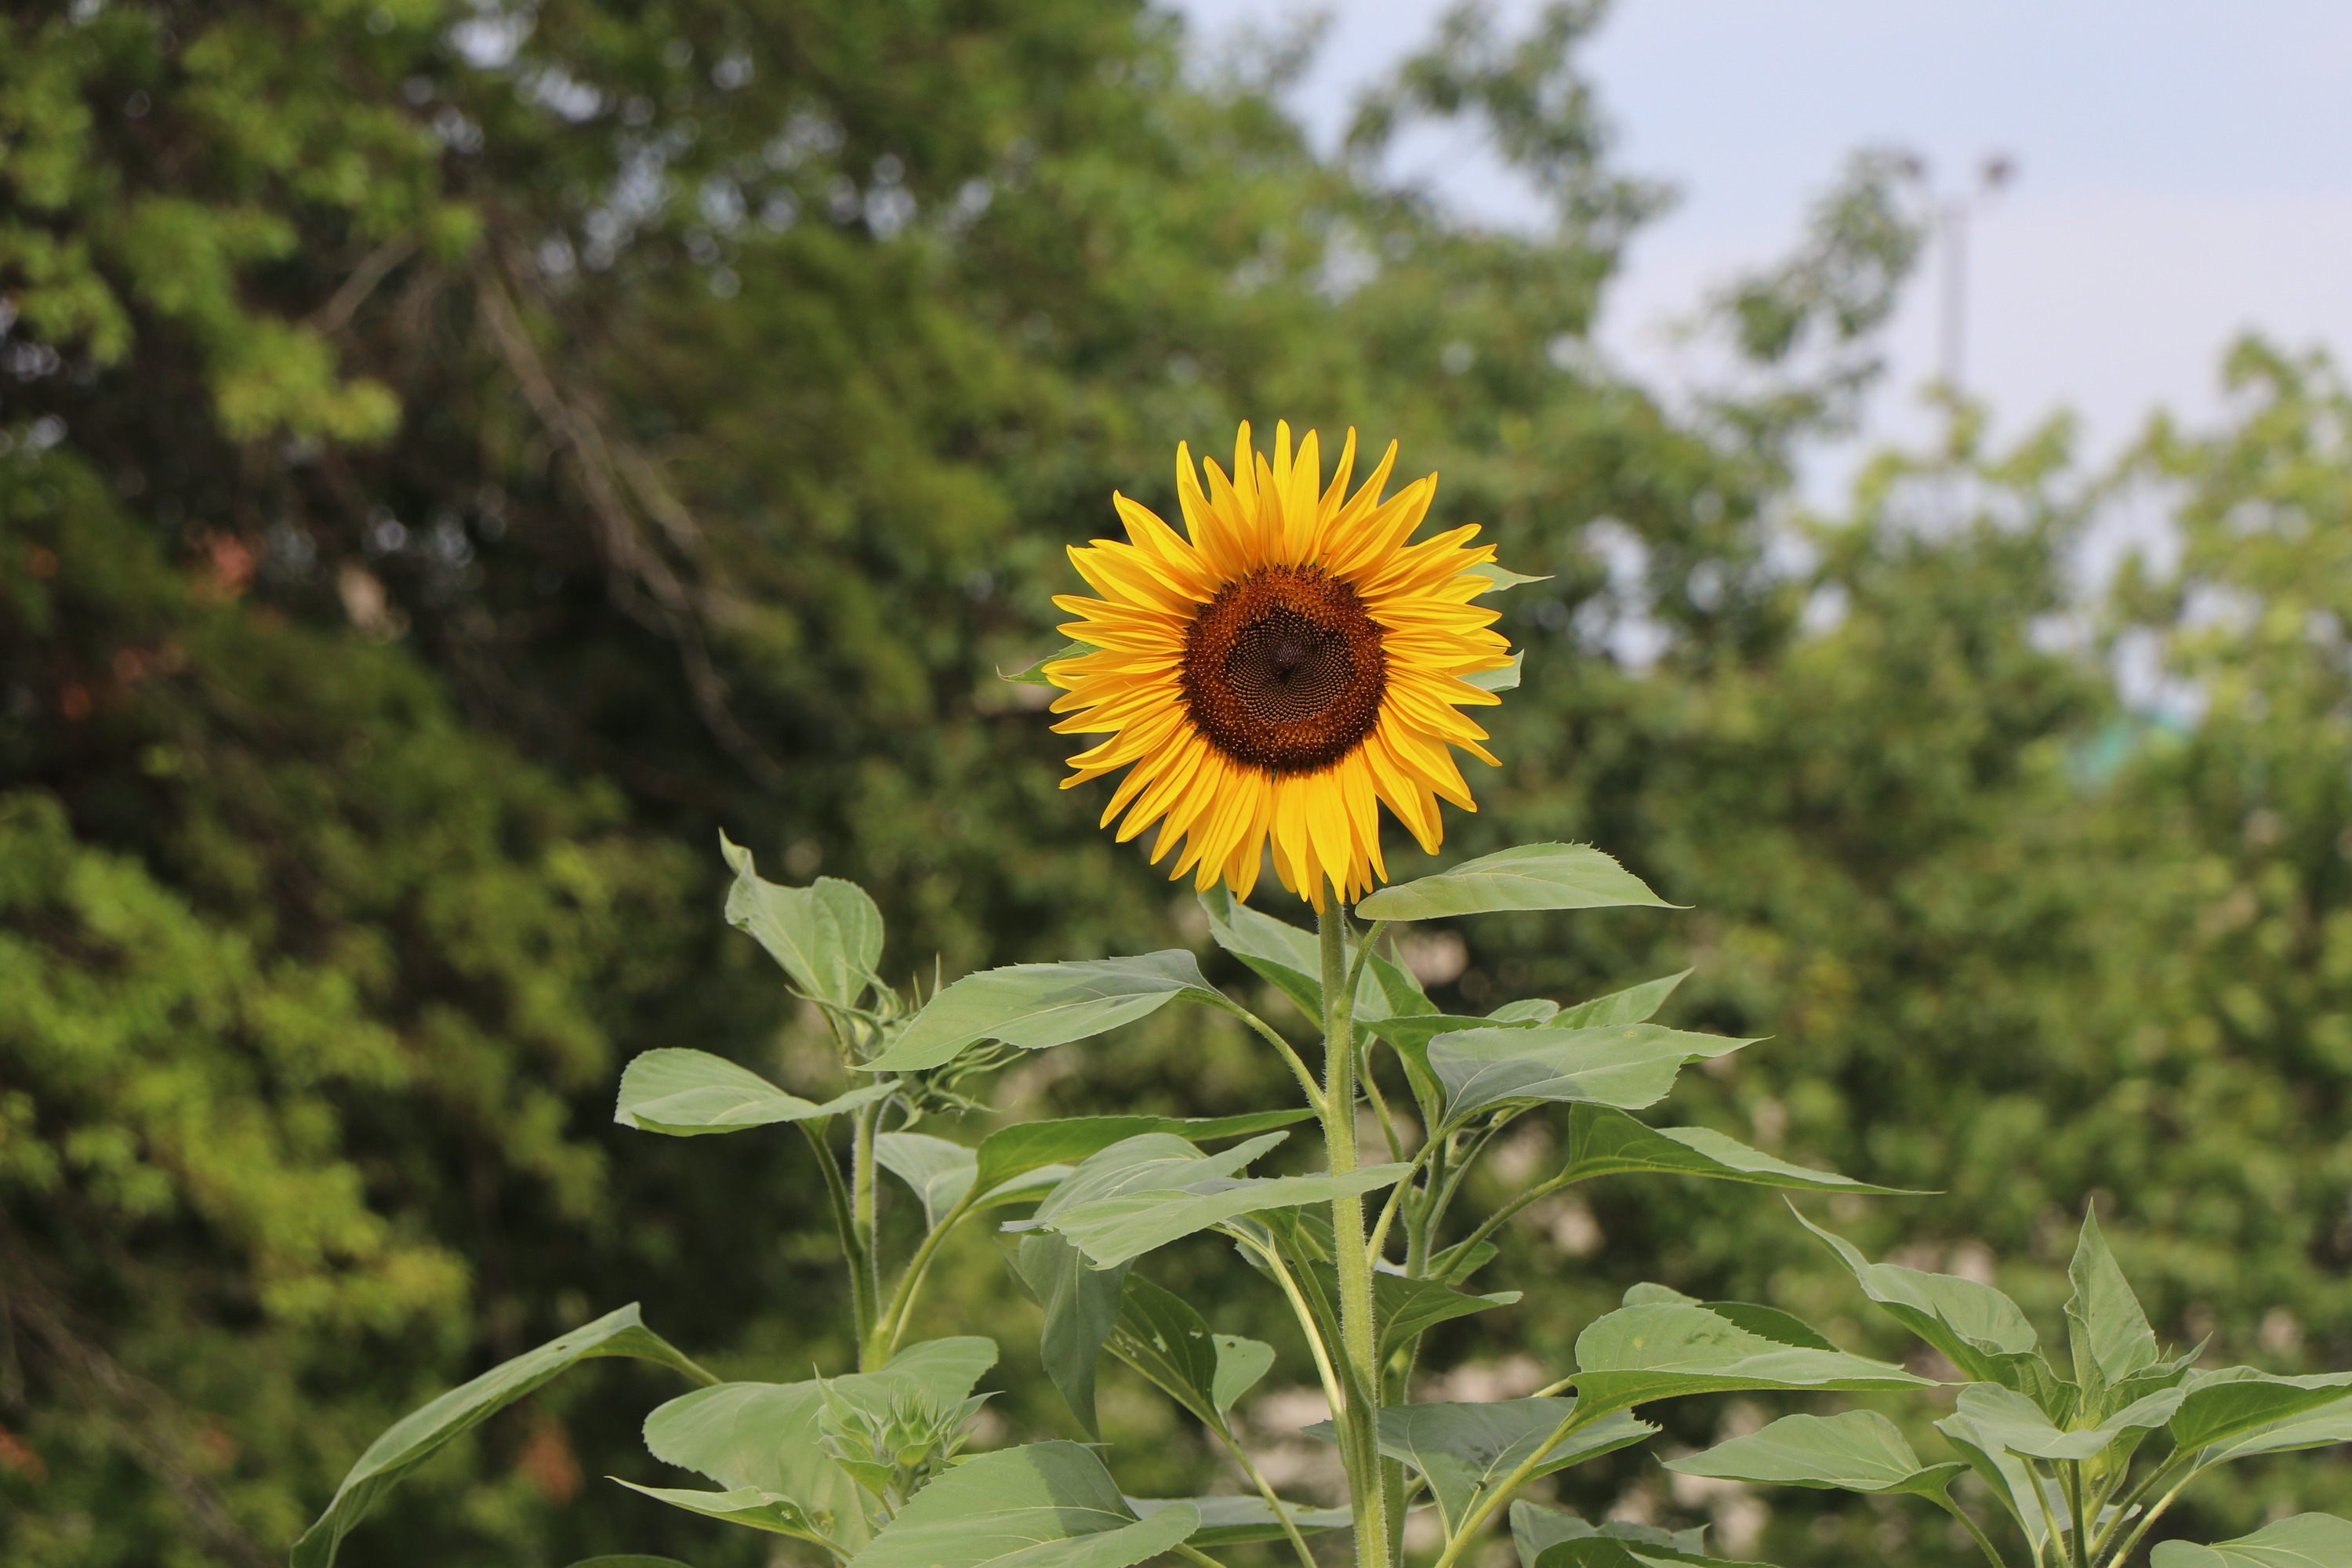 A large, yellow sunflower in bloom.